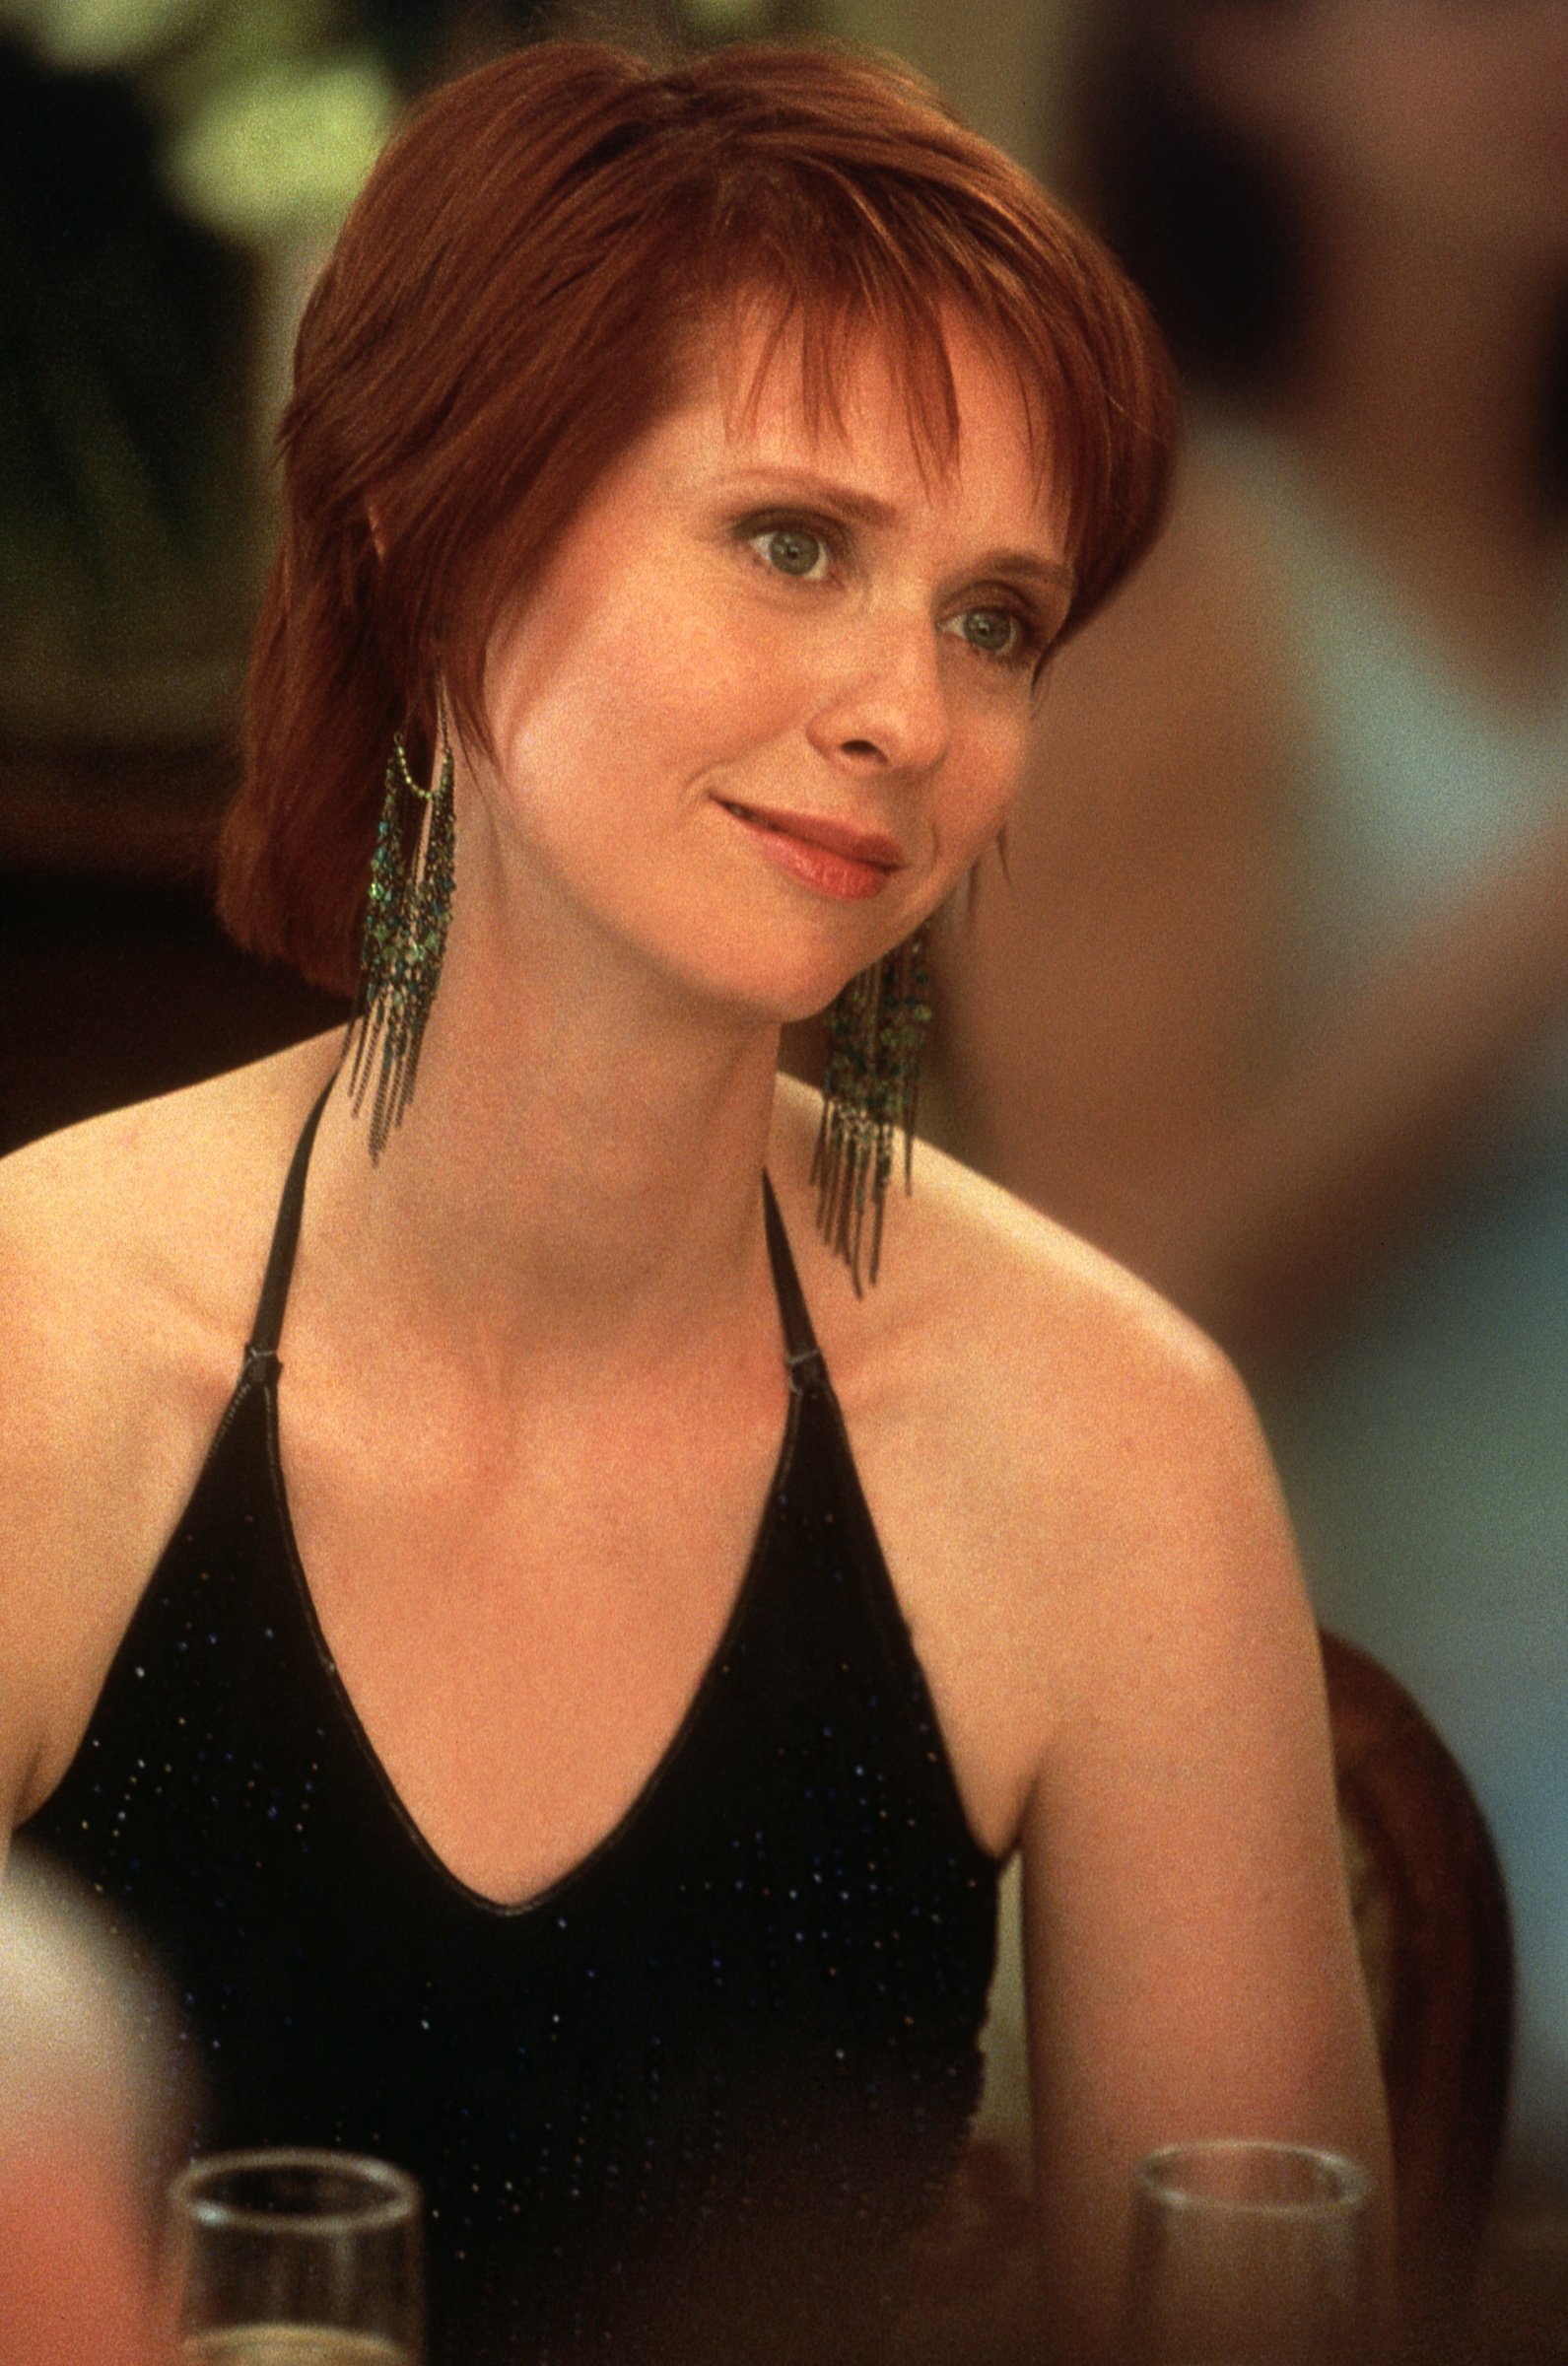 Cynthia Nixon as Miranda Hobbes wears a black halter top during the filming of 'Sex and the City' season 3